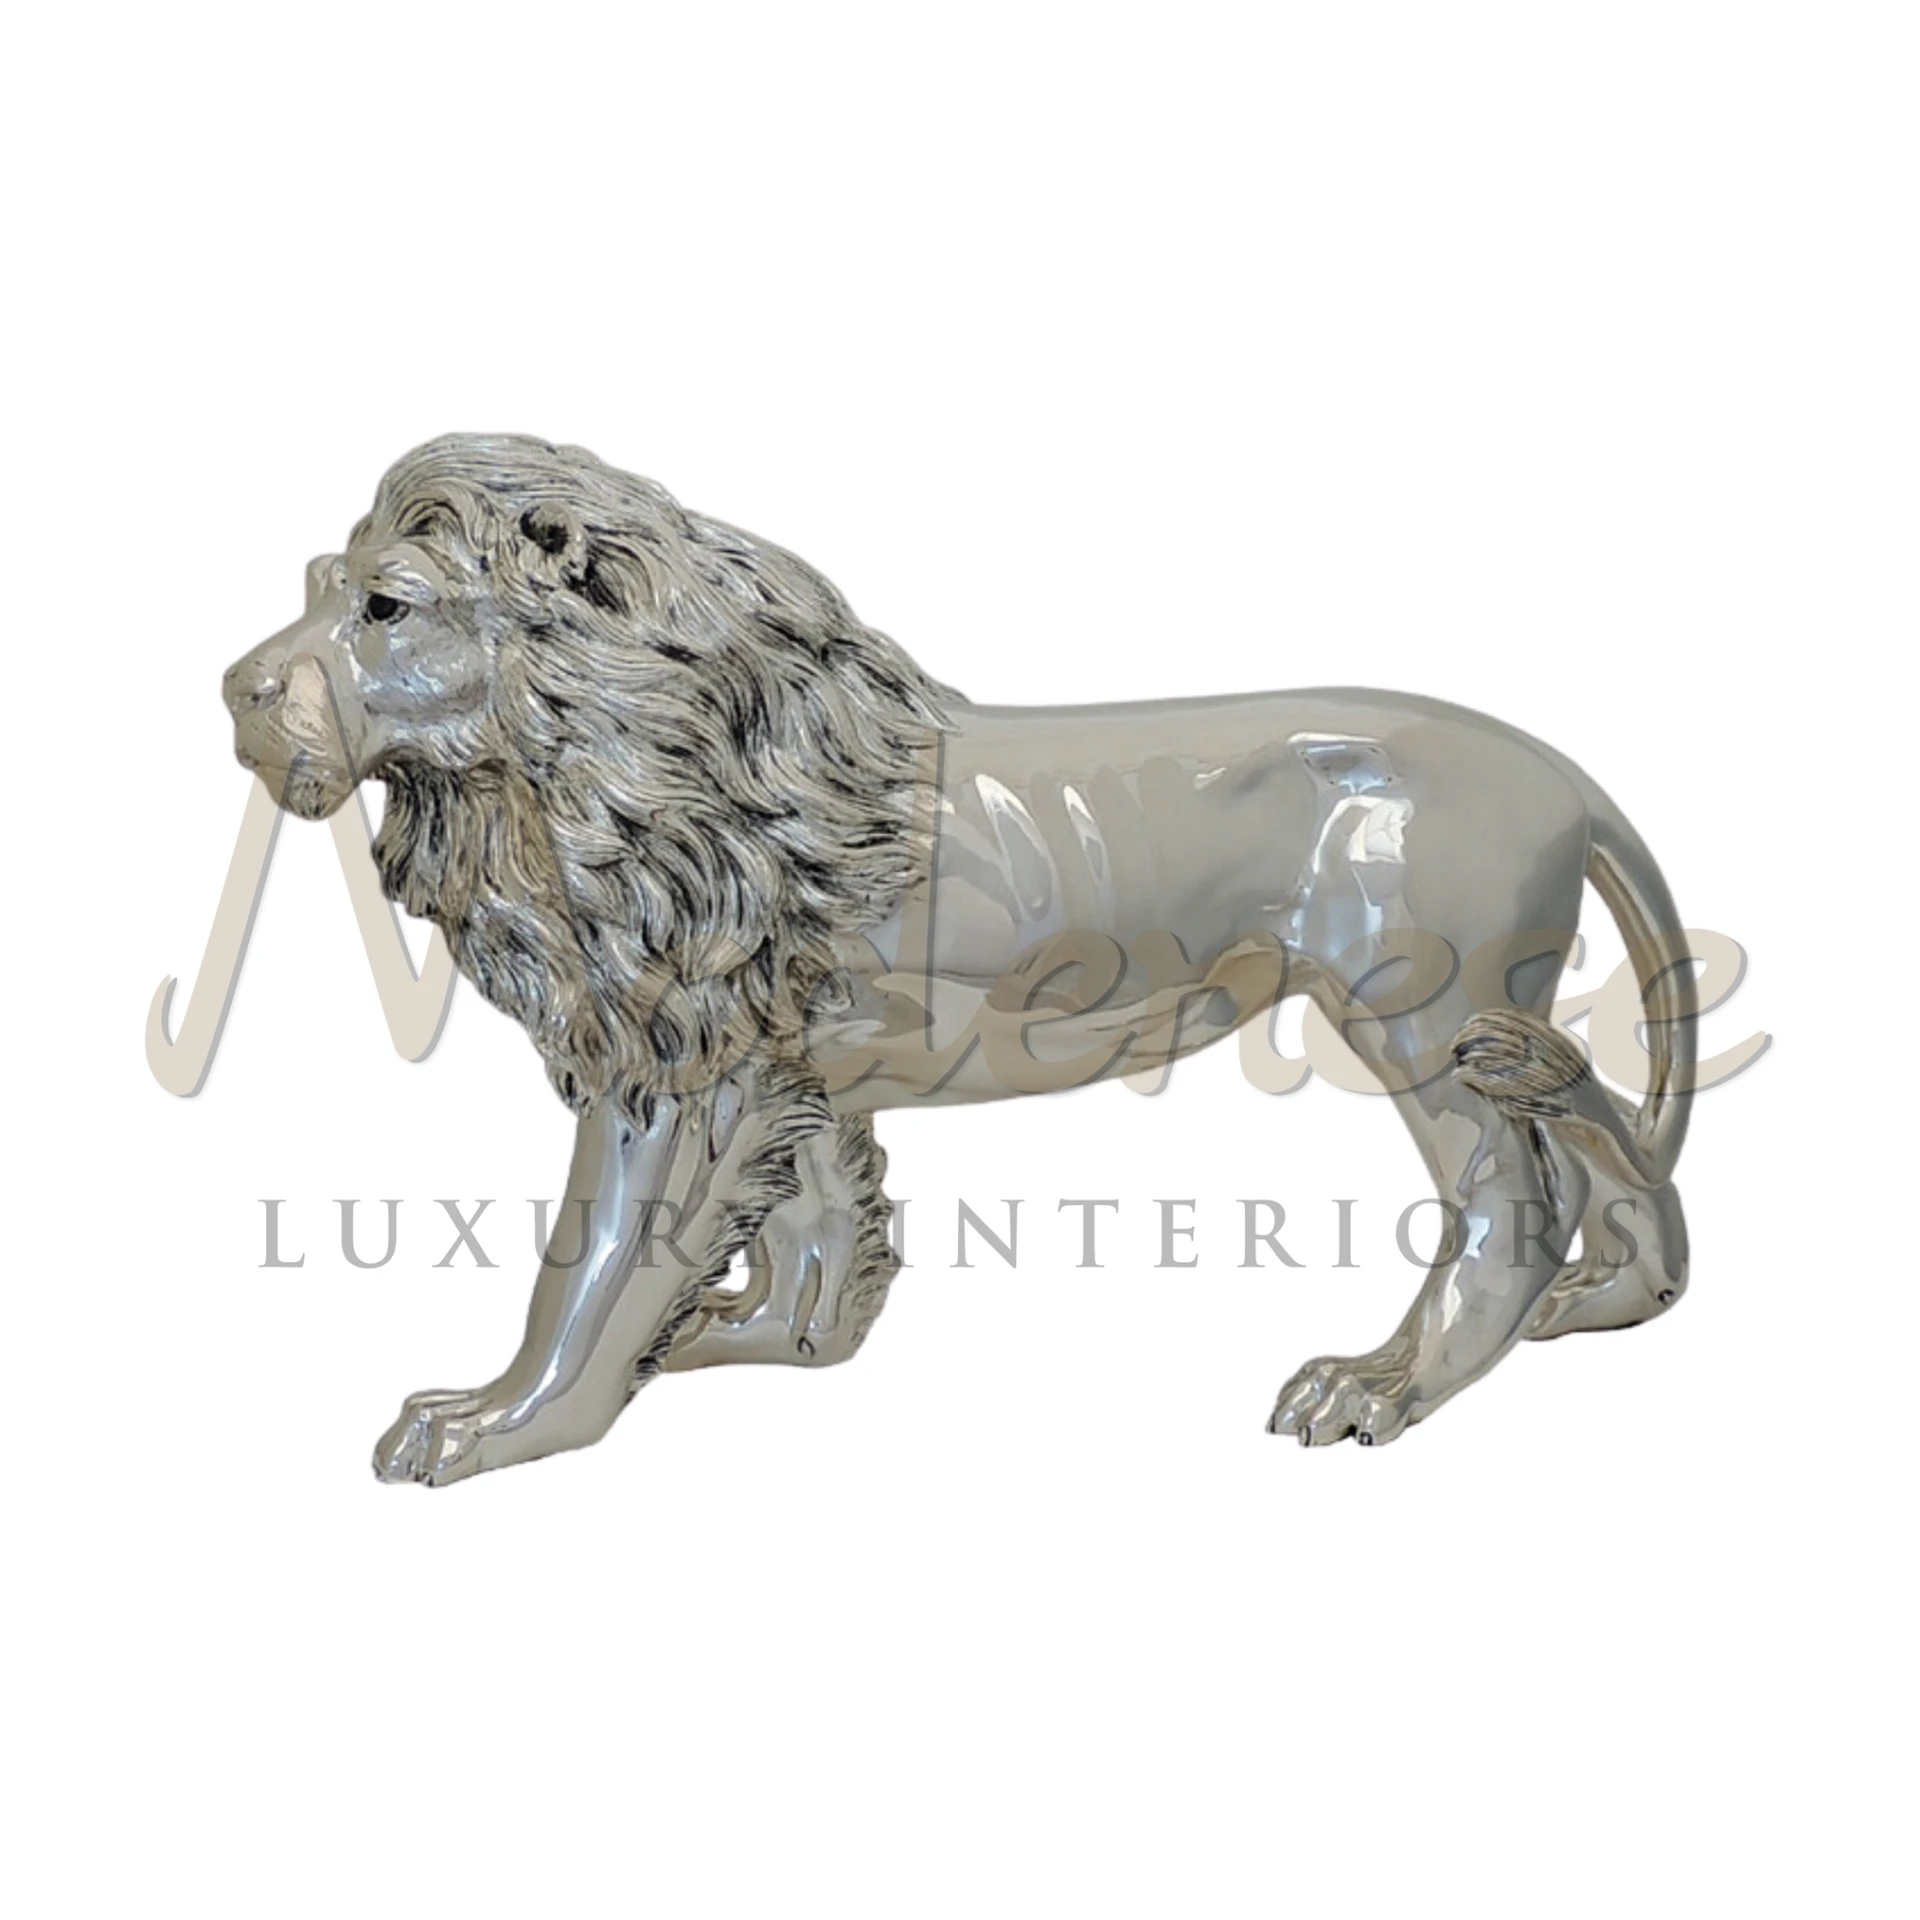 Luxury Silver Lion statuette in elegant design, crafted with detailed silver plating, ideal for sophisticated interior design and upscale home décor.